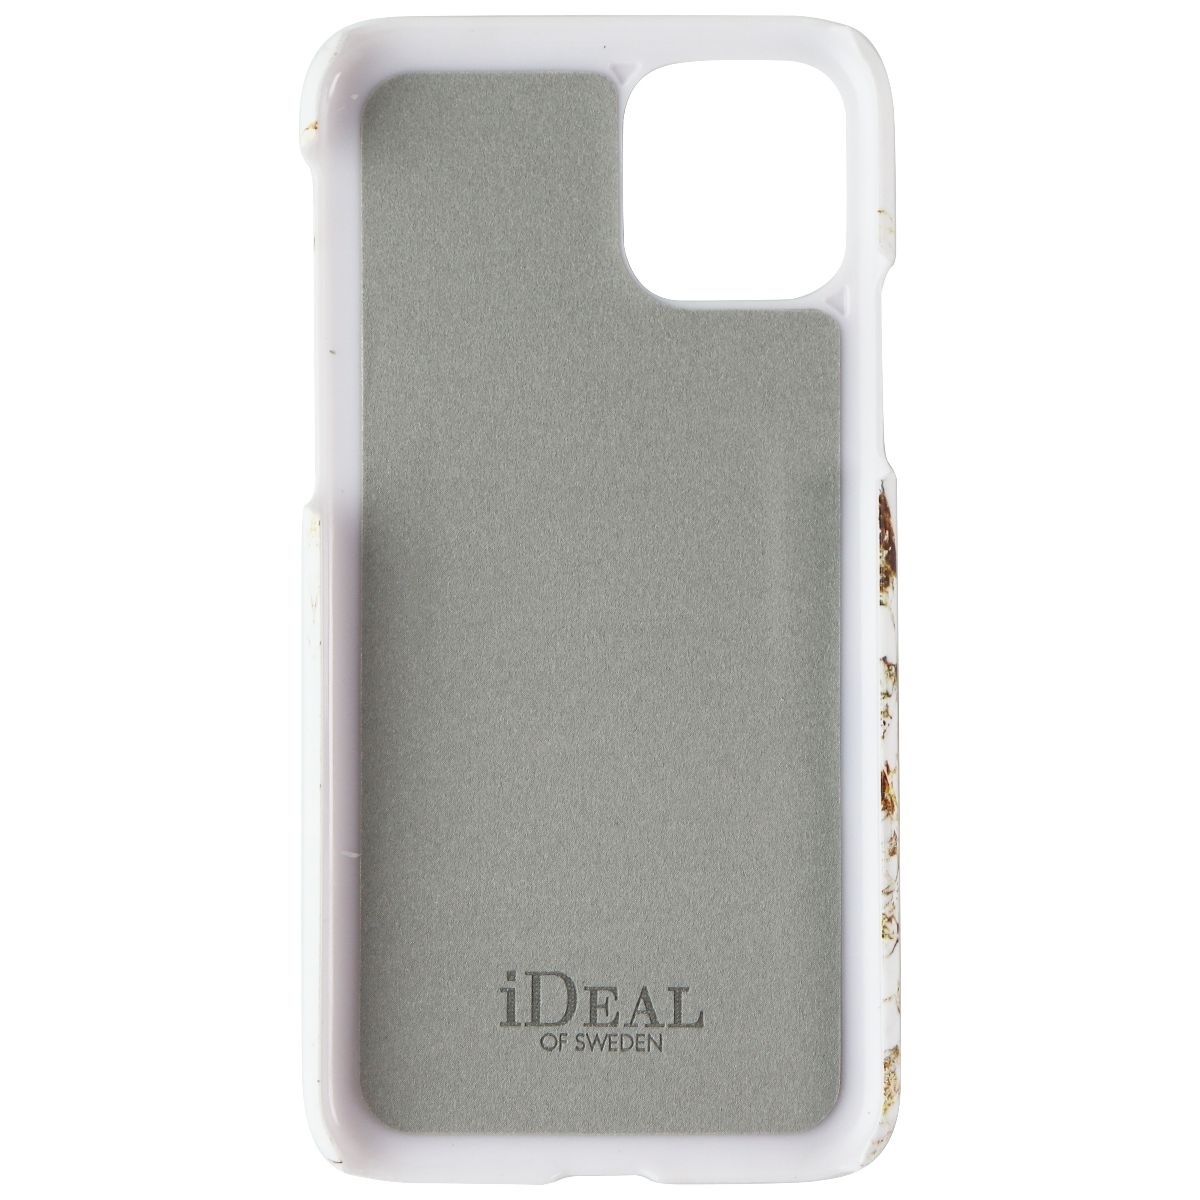 IDeal Of Sweden Hardshell Case For Apple IPhone 11 Pro / Xs / X - Carrara Gold